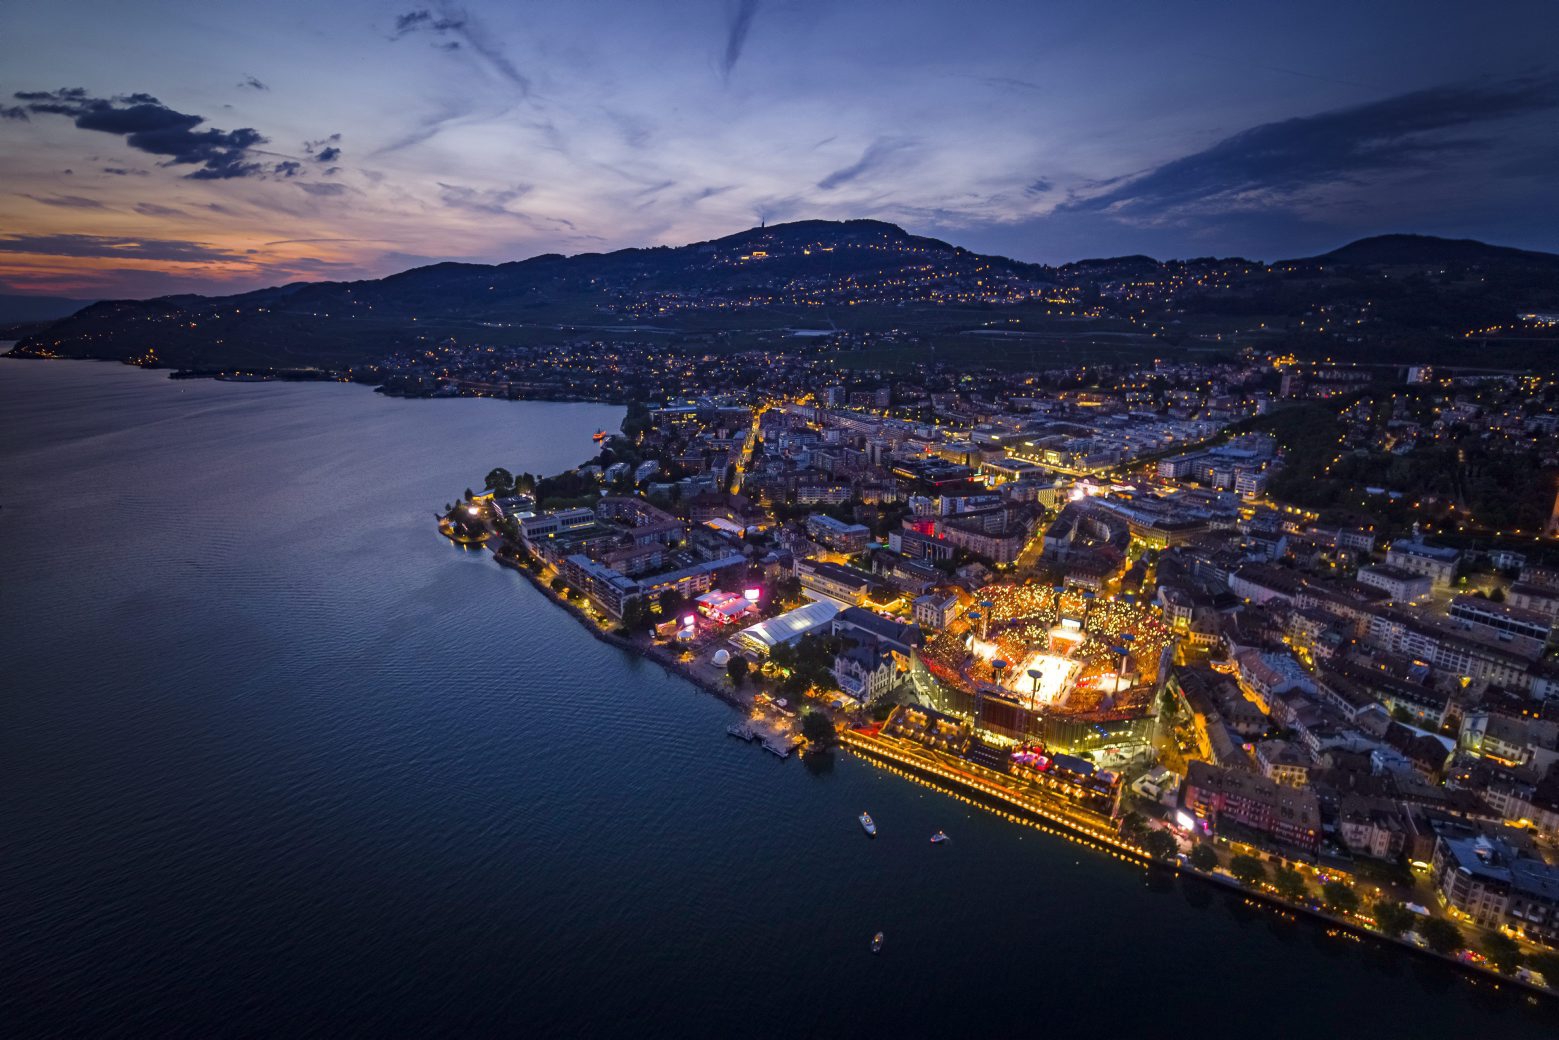 An aerial view shows the full arena of the "Fete des Vignerons" (winegrowers' festival in French), with a capacity of 20'000 spectators and hosting a giant central LED floor of approximately 800 square meters, during the opening night in Vevey, Switzerland, Thursday, July 18, 2019. Organized in Vevey by the brotherhood of winegrowers since 1979, the event will celebrate winemaking from July 18 to August 11 this year. (KEYSTONE/Valentin Flauraud). Une vue aerienne montre l'arene de la Fete des Vignerons (FEVI) et son sol en LED geant d'approximativement 800 metres carres pendant le premier spectacle ce jeudi 18 juillet 2019 a Vevey. (KEYSTONE/Valentin Flauraud) SWITZERLAND FETE DES VIGNERONS REHEARSAL